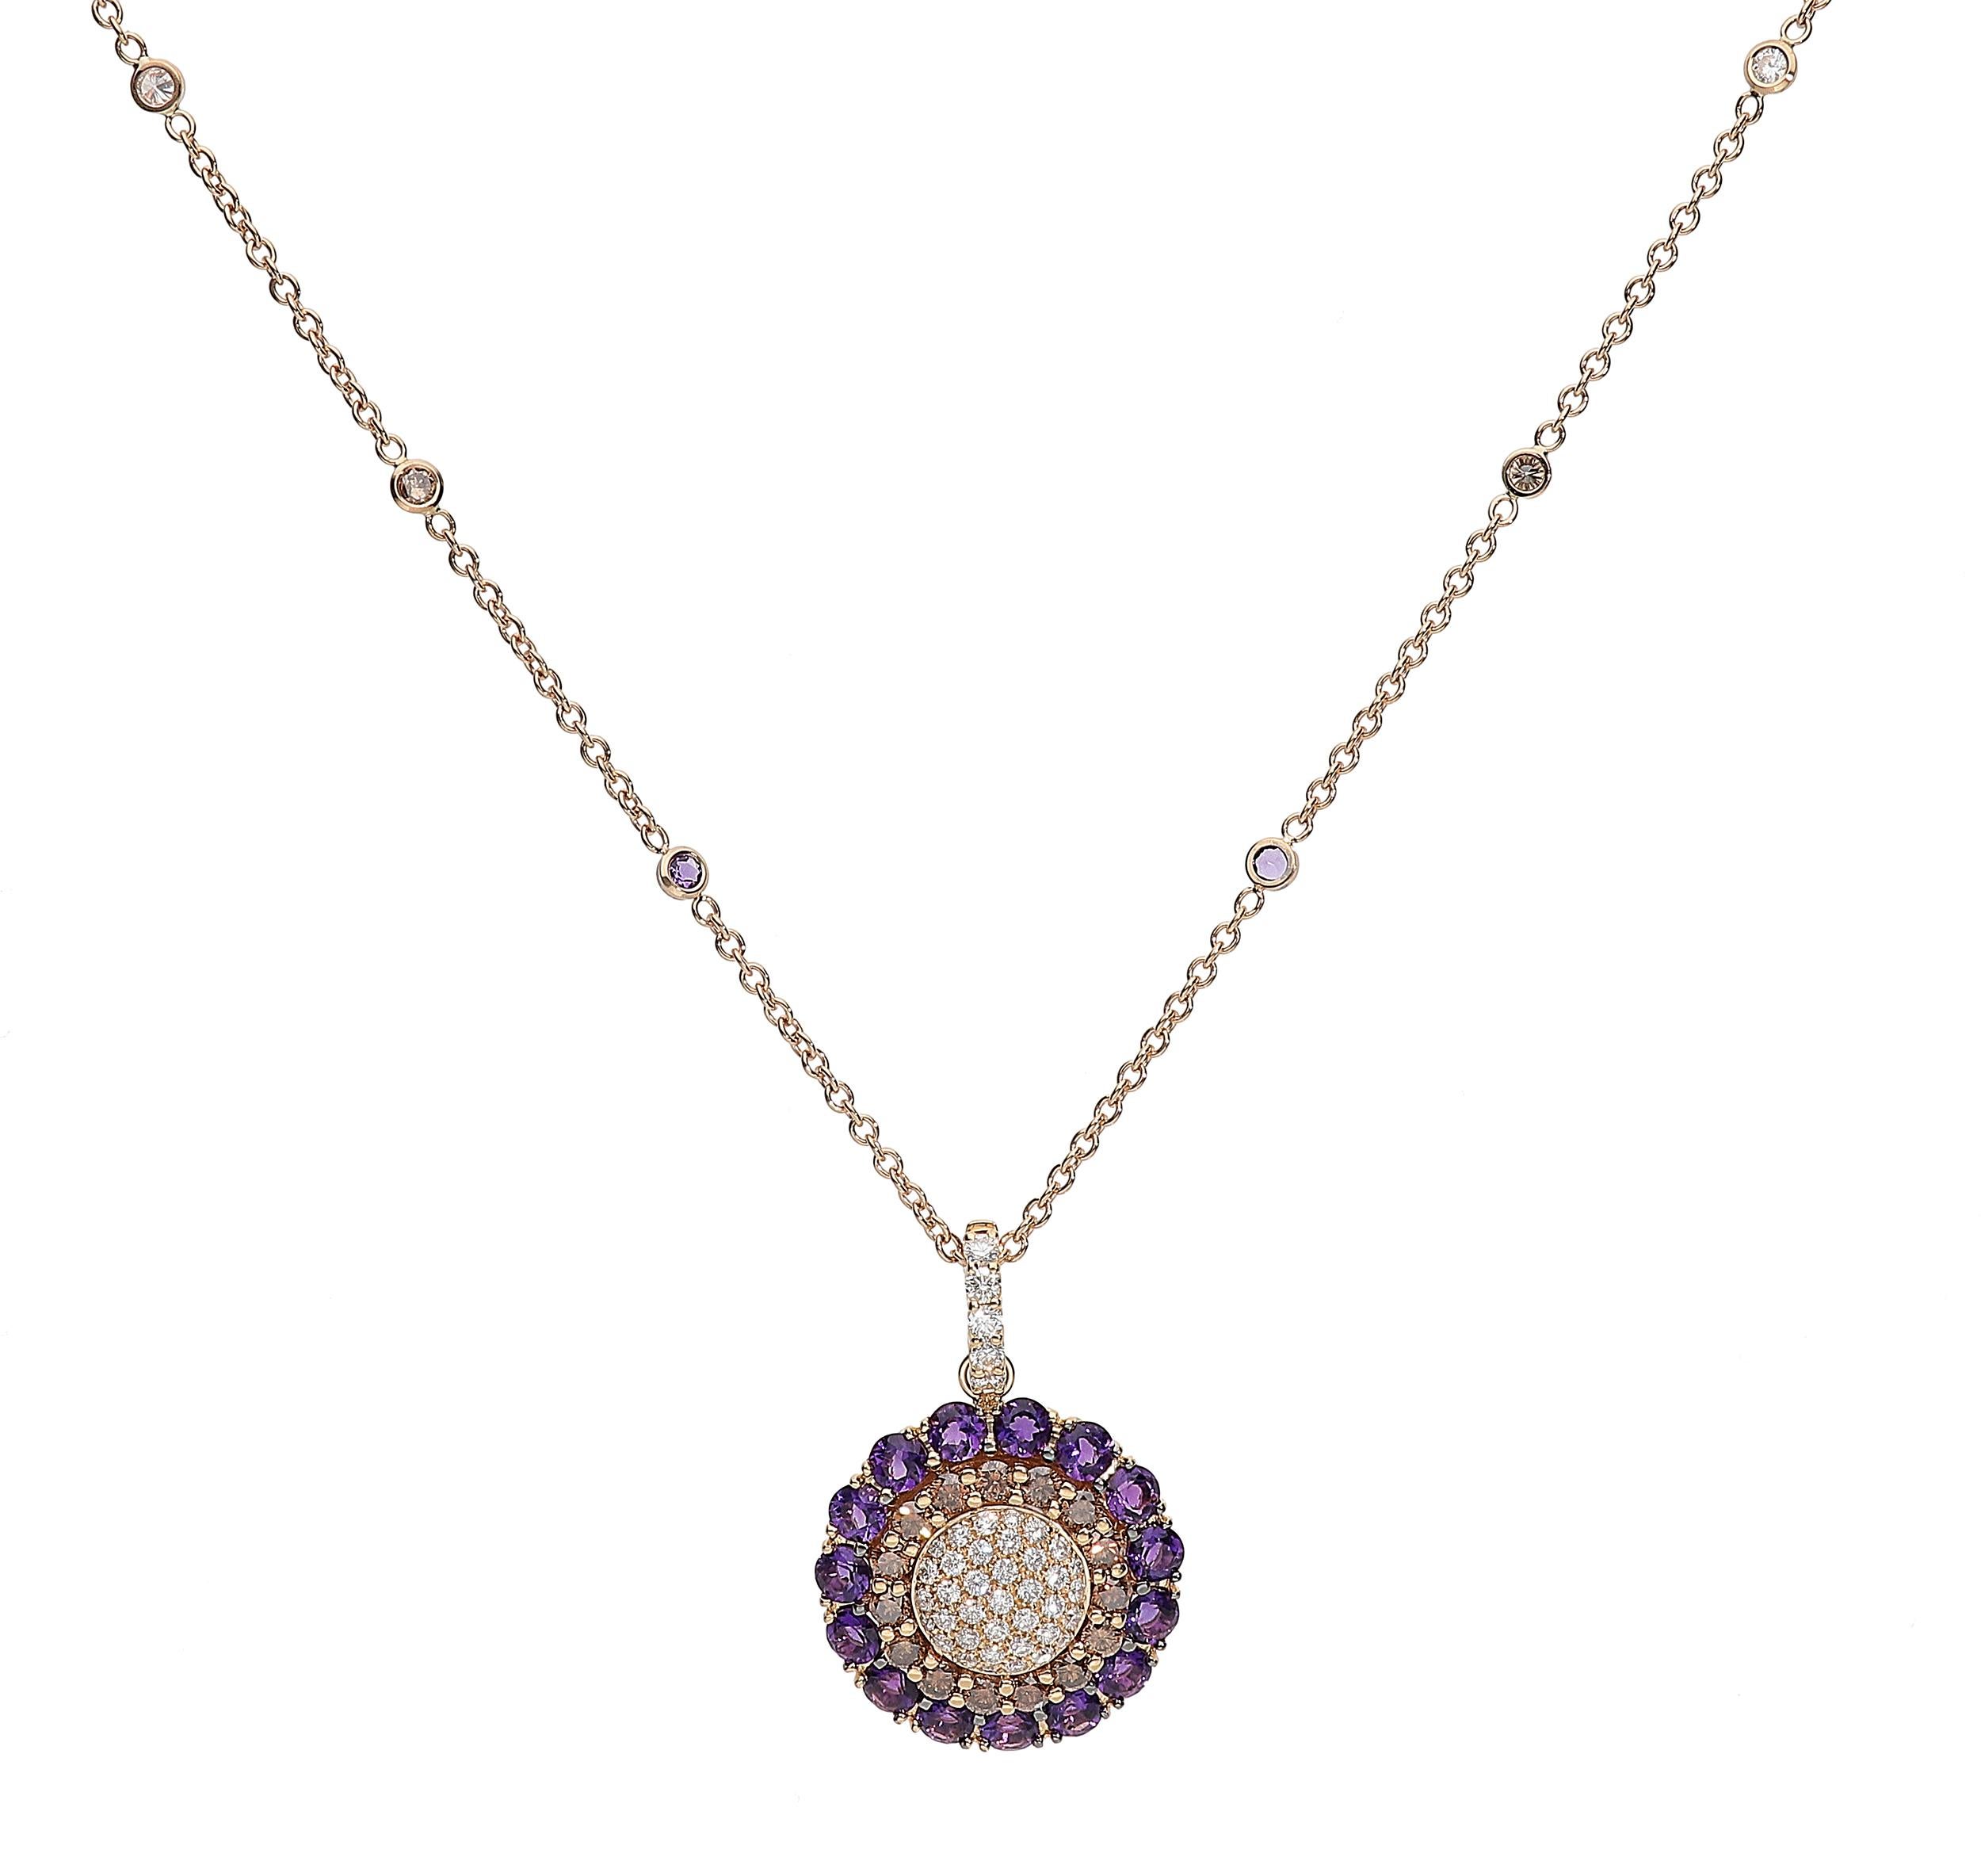 Delicious necklace in 18kt pink gold for 14,95 grams formed by a pendant and a 44 centimeters long chain with resizing ring on 41 centimeters and stones on circles.
The pendant is a round element set with amethyst, white and brown round brilliant